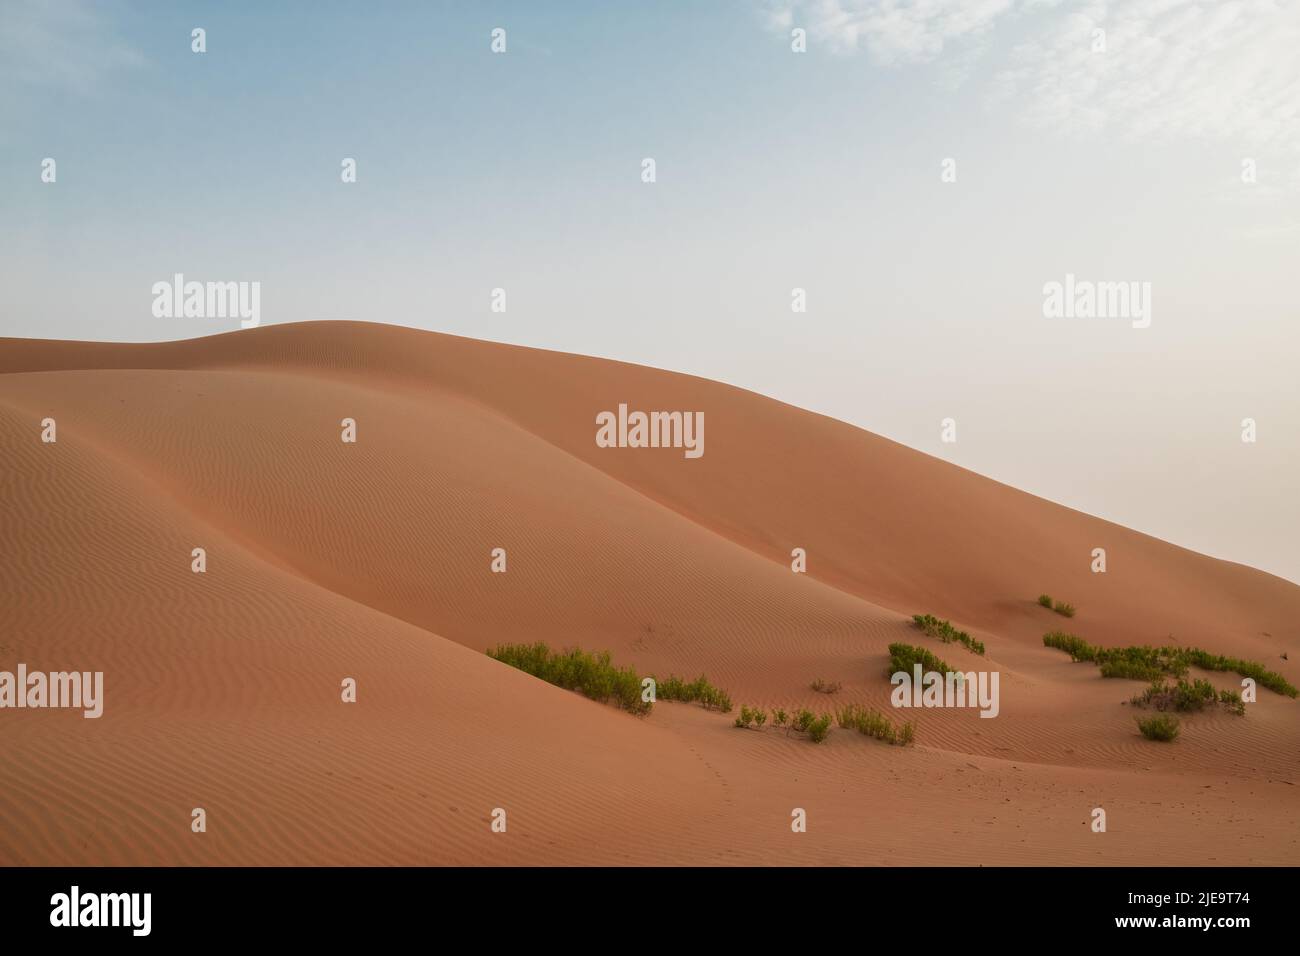 Sand dune hills against a bright blue sky in Al Wathbah Desert in Abu Dhabi, United Arab Emirates. Beautiful landscape for horizontal copy space. Stock Photo